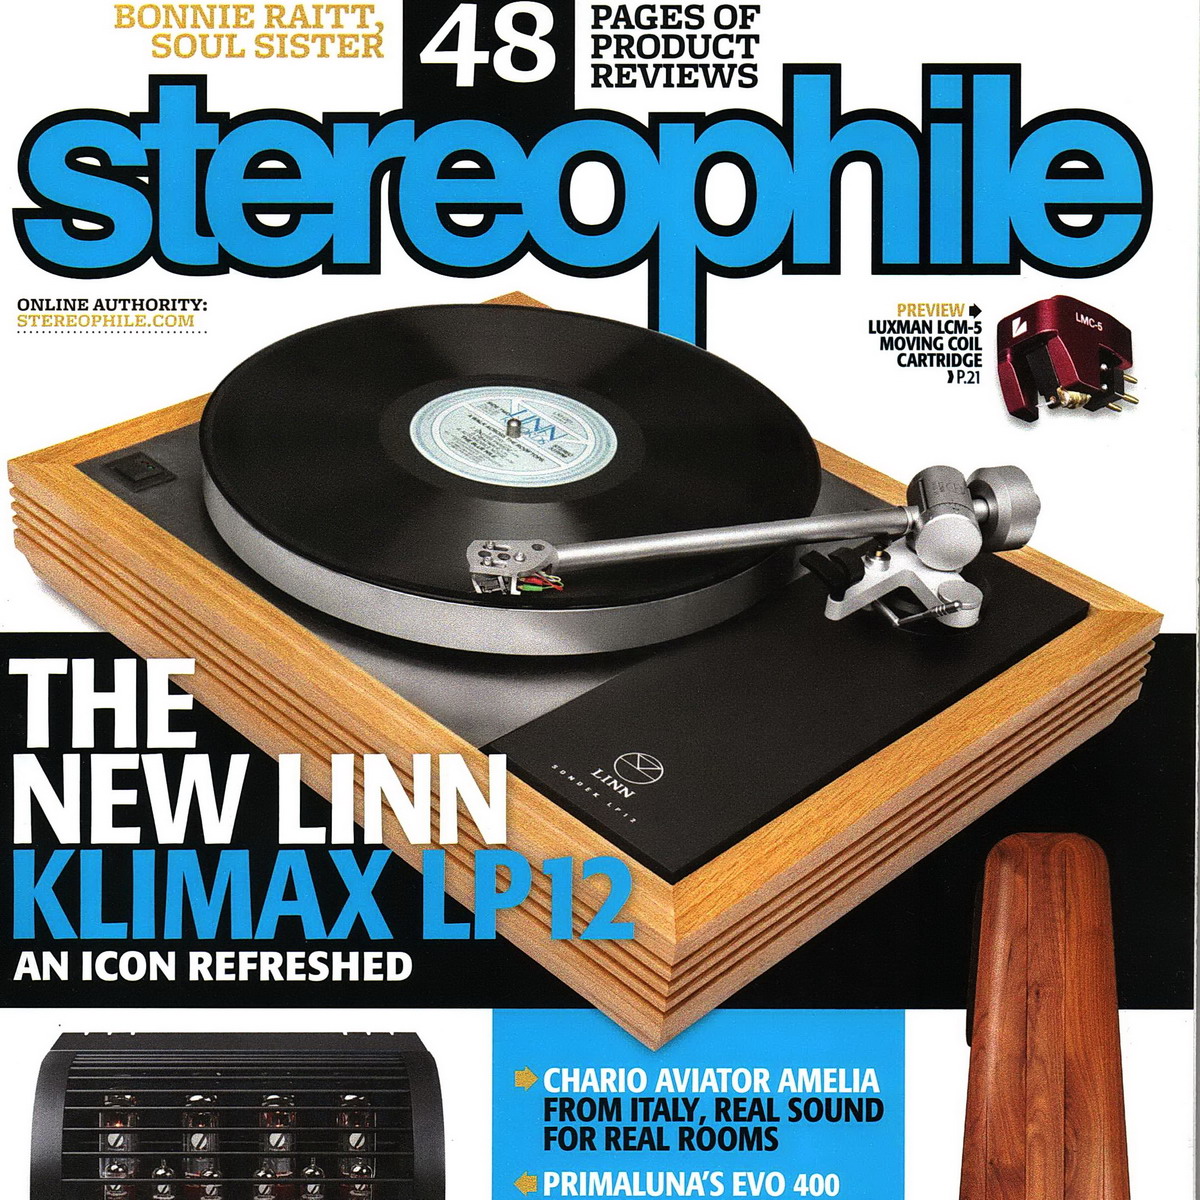 „Stereophile” Vol.45 No.6 ⸜ June 2022